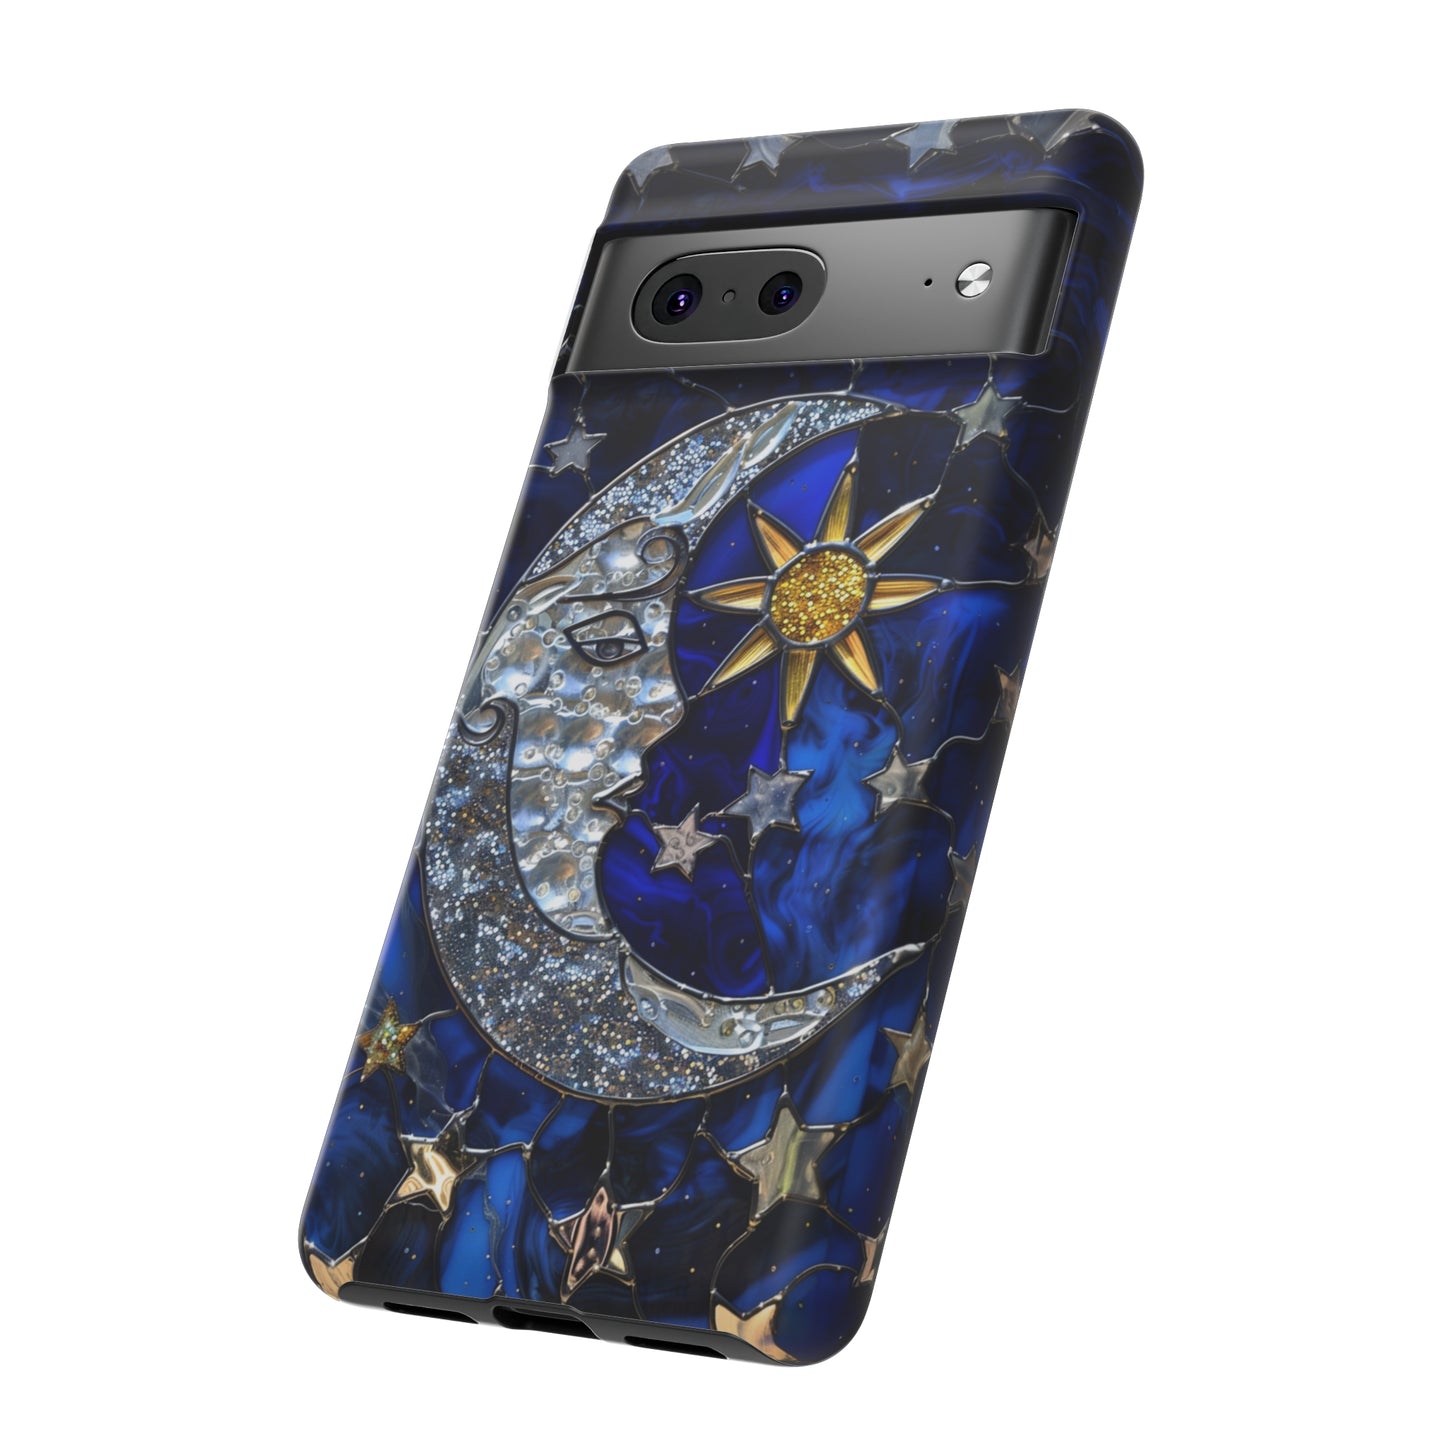 Cosmic Moon & Stars Stained Glass Starry Night Phone Case